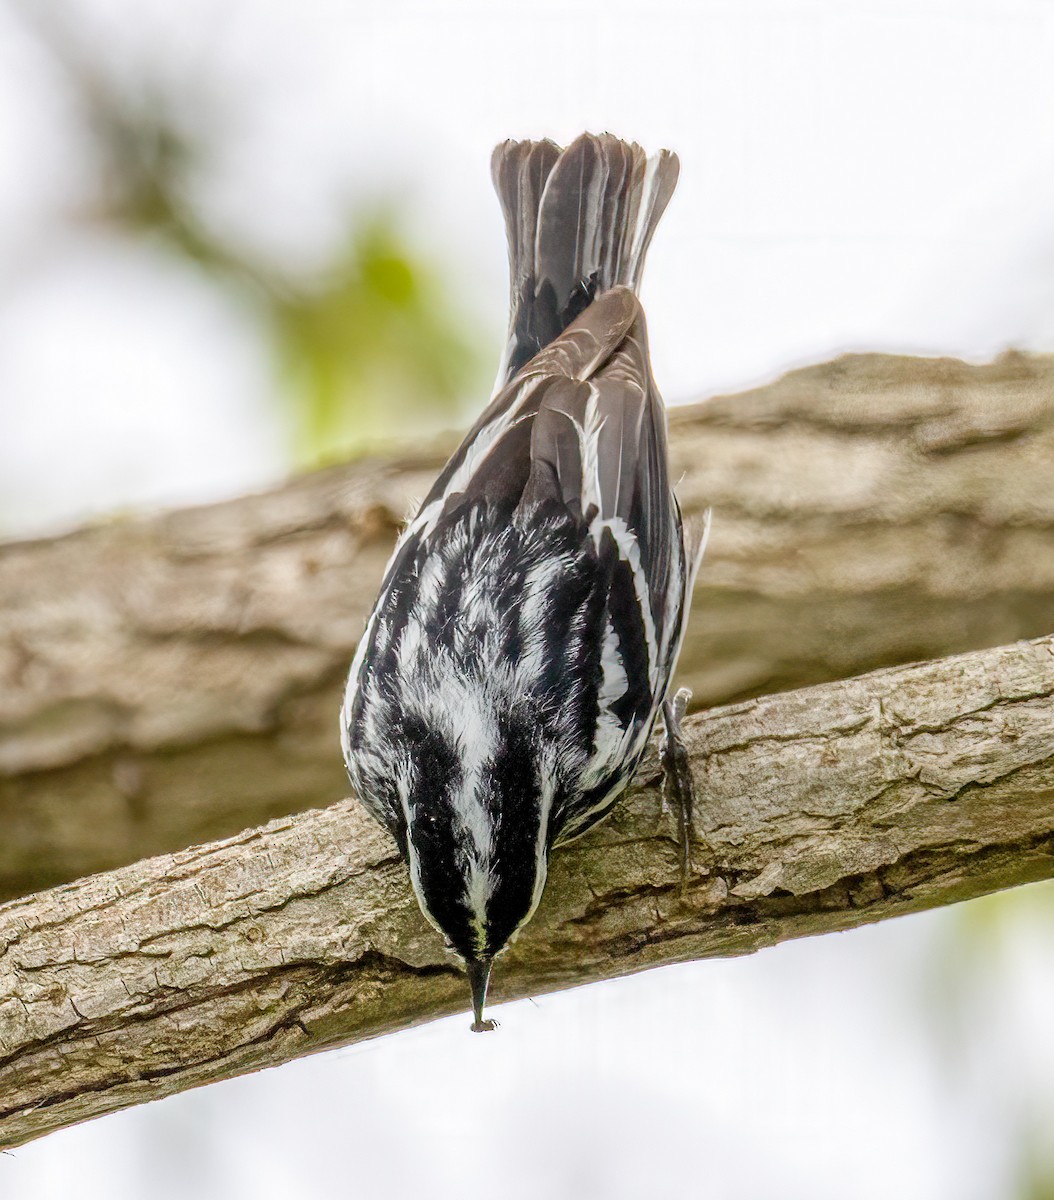 Black-and-white Warbler - Ward Ransdell